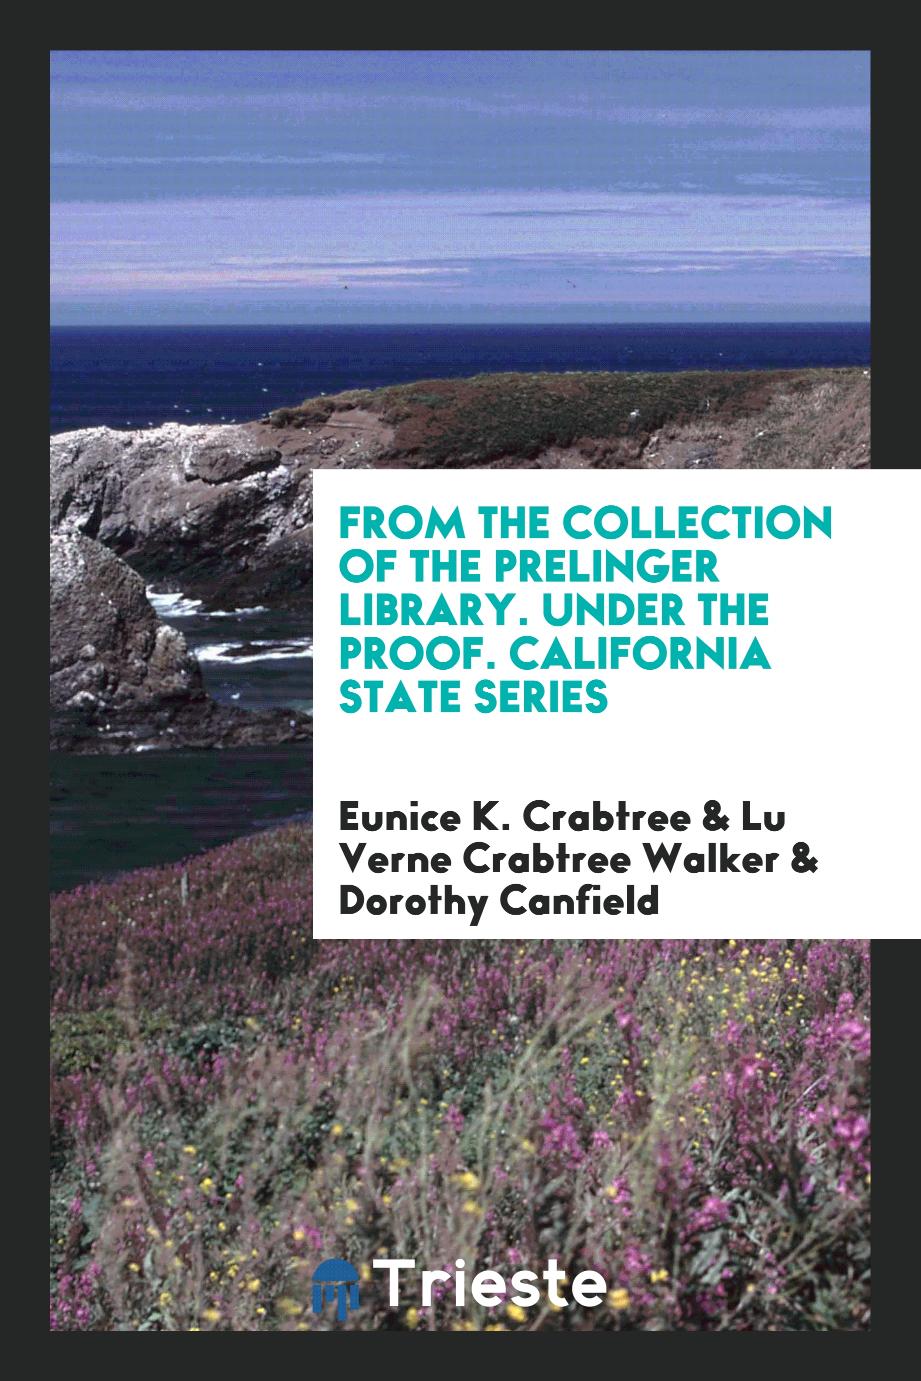 From the Collection of the Prelinger Library. Under the Proof. California State Series